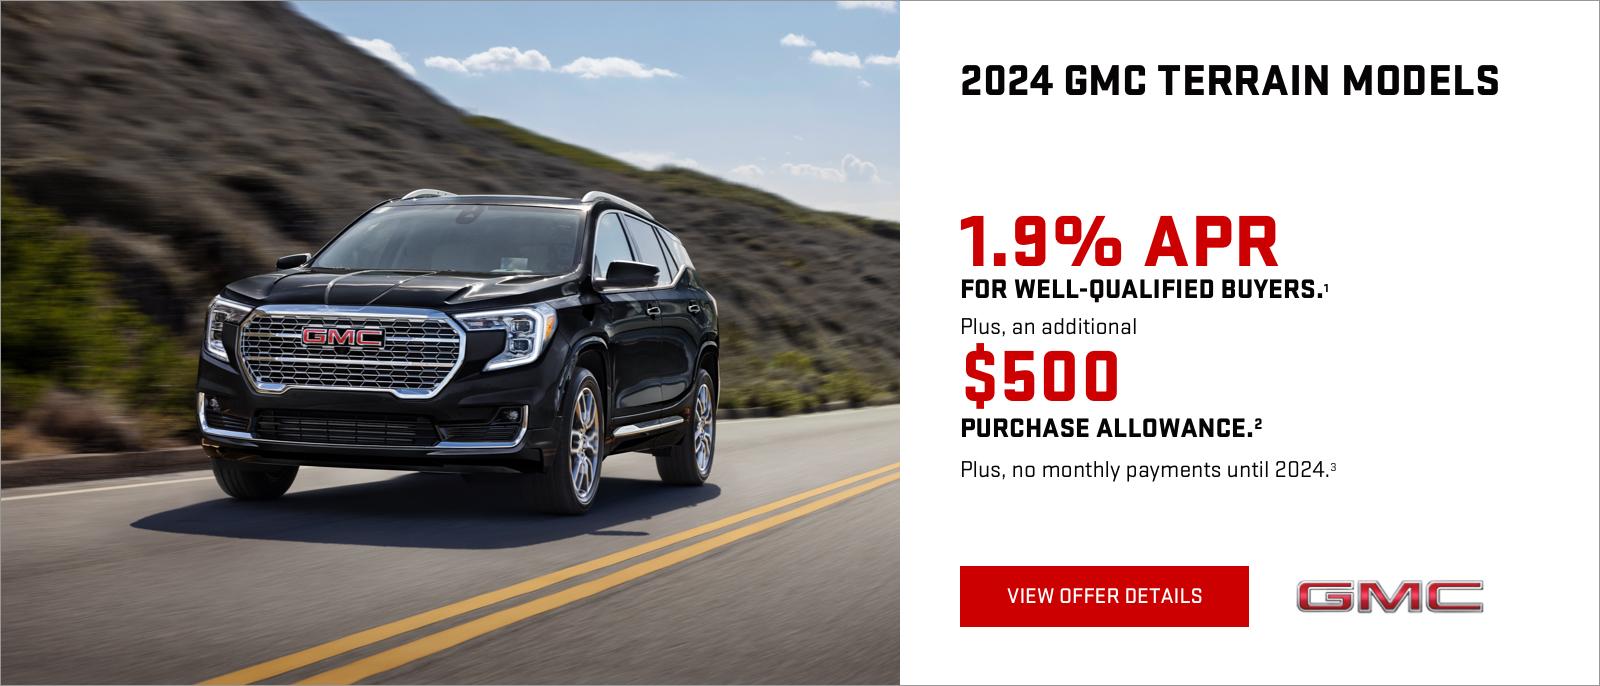 1.9% APR for well-qualified buyers.1

Plus, receive an additional $500 PURCHASE ALLOWANCE.2

PLUS, NO MONTHLY PAYMENTS UNTIL 2024. 3